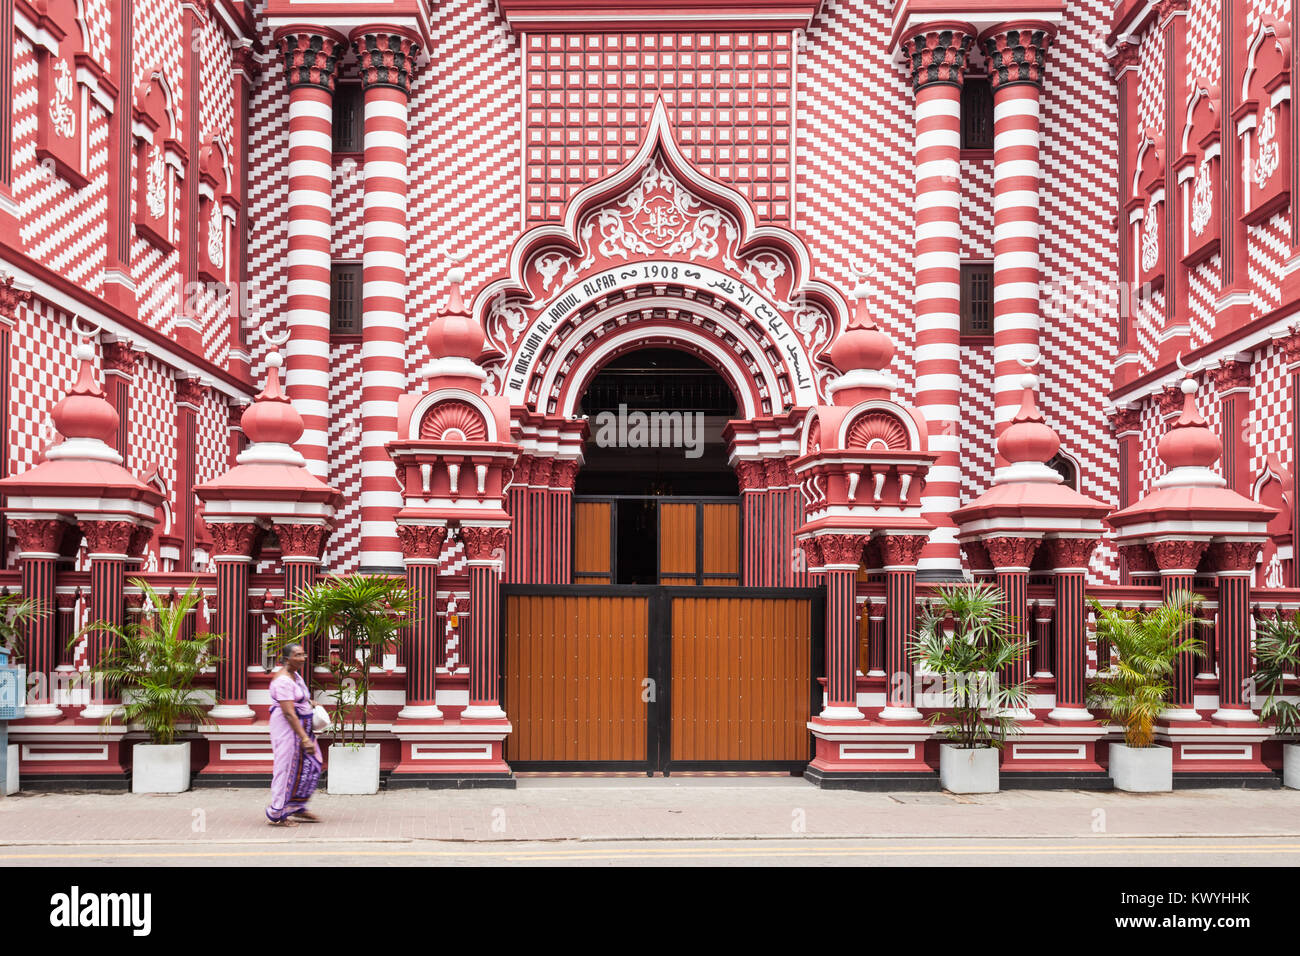 Jami-Ul-Alfar Mosque or Red Masjid Mosque is a historic mosque in Colombo, capital of Sri Lanka Stock Photo